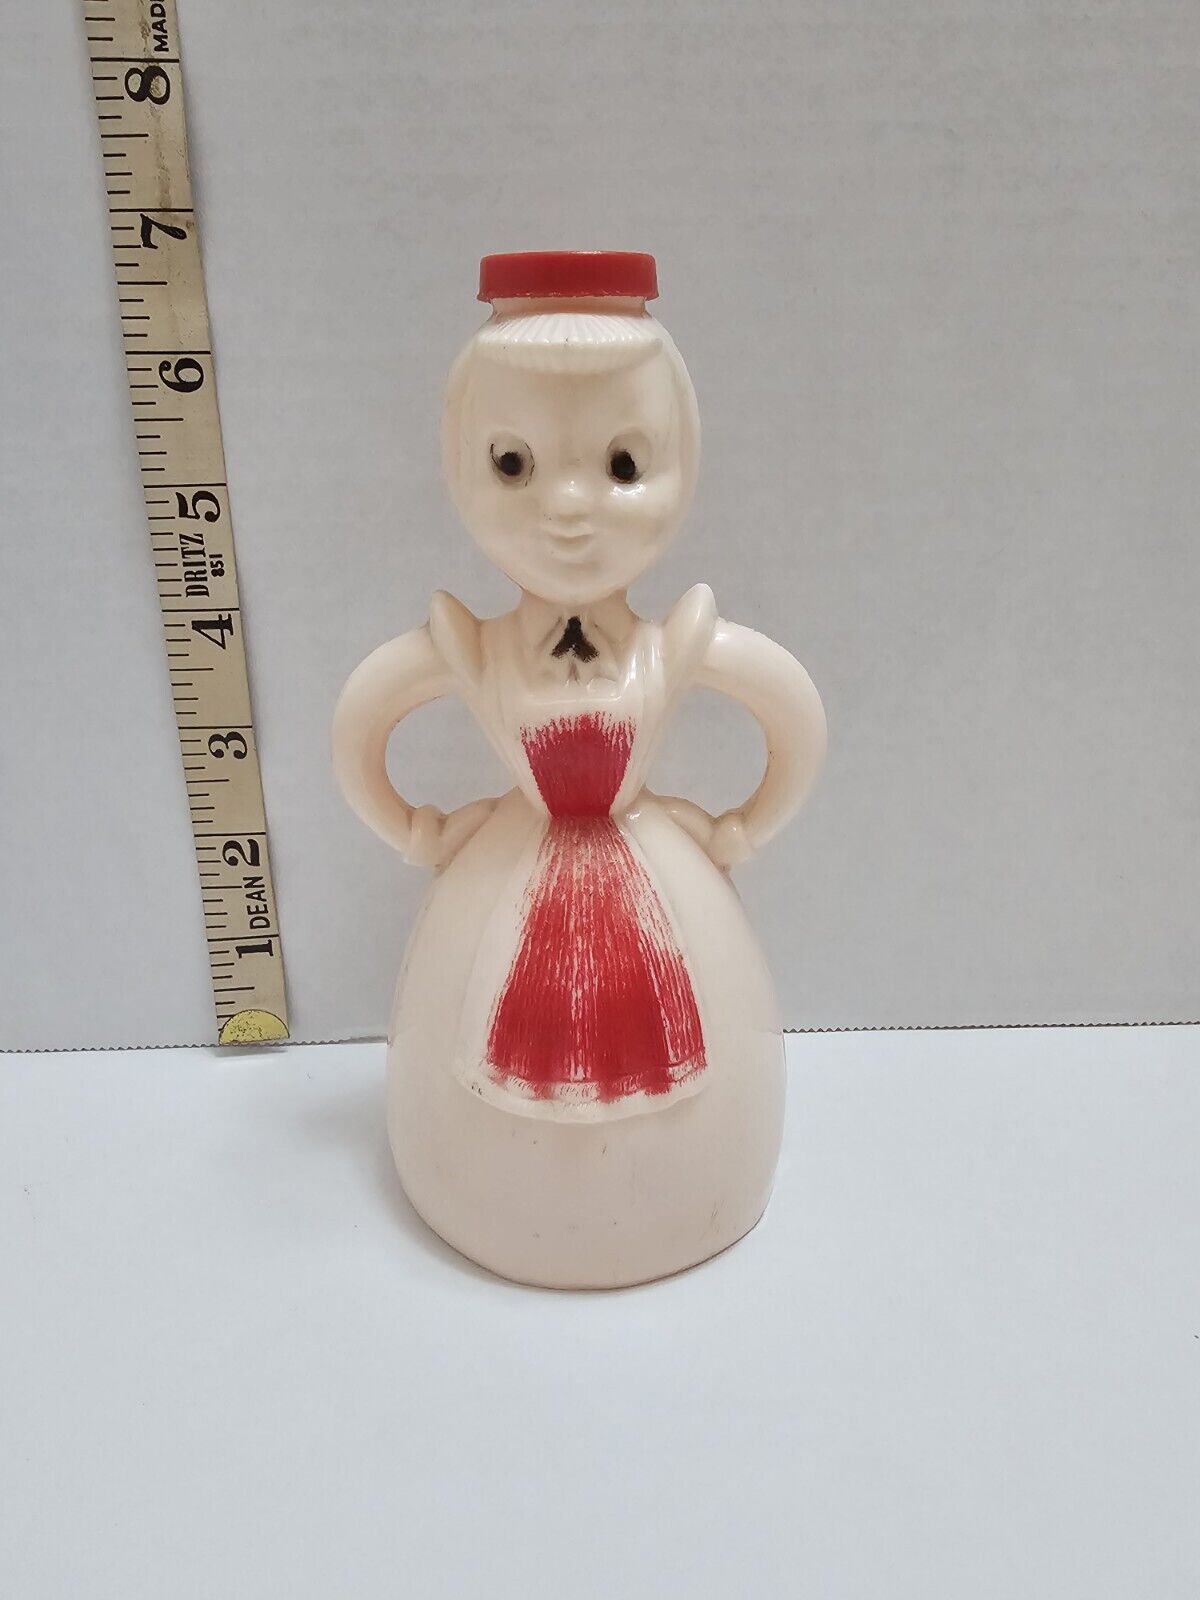 Vintage Merry Maid Laundry Sprinkler Bottle With Red Cap Collectible